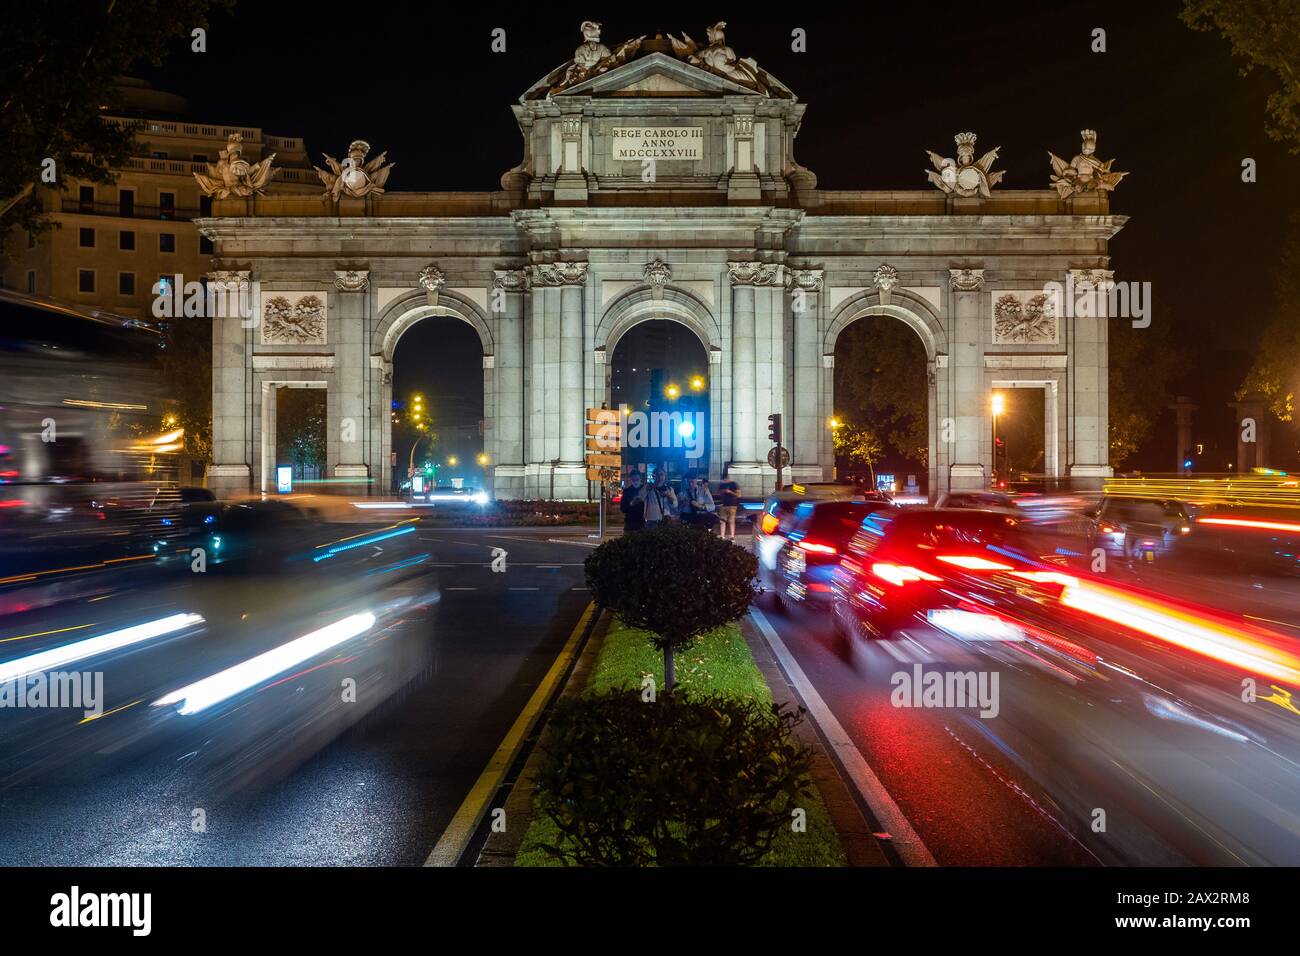 Night view of the Alcala Gate (Puerta de Alcala) monument at Plaza de La Independencia in Central Madrid, Spain. Stock Photo